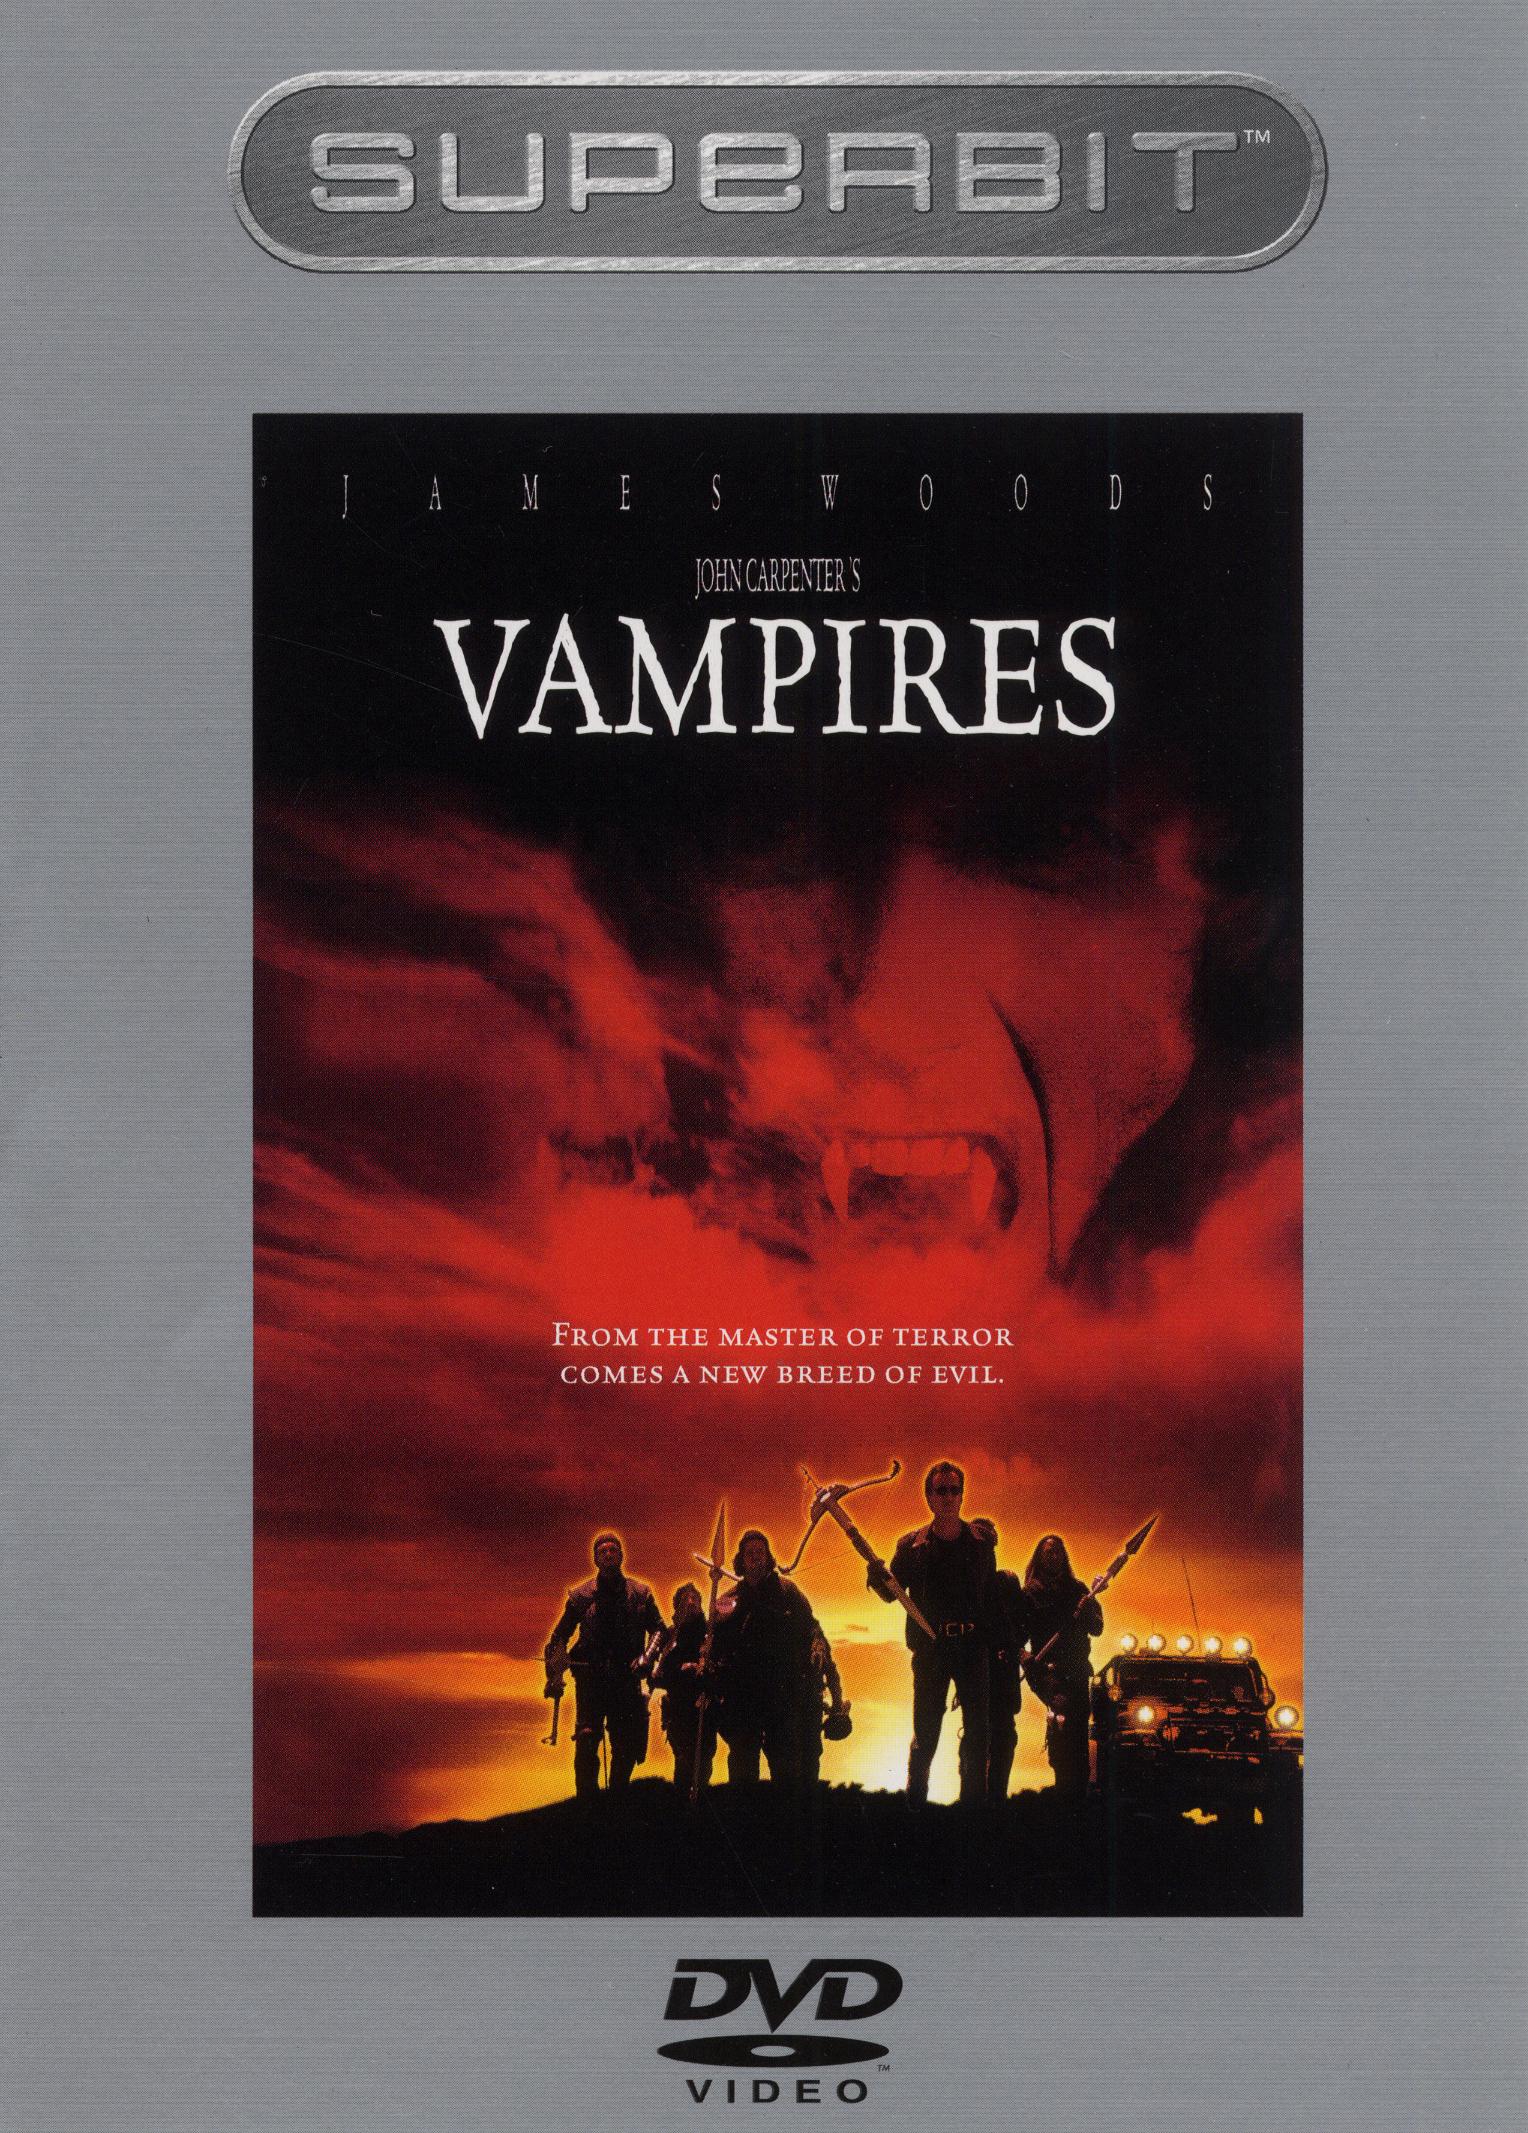 Book and Movie Review: Vampire$, by John Steakley